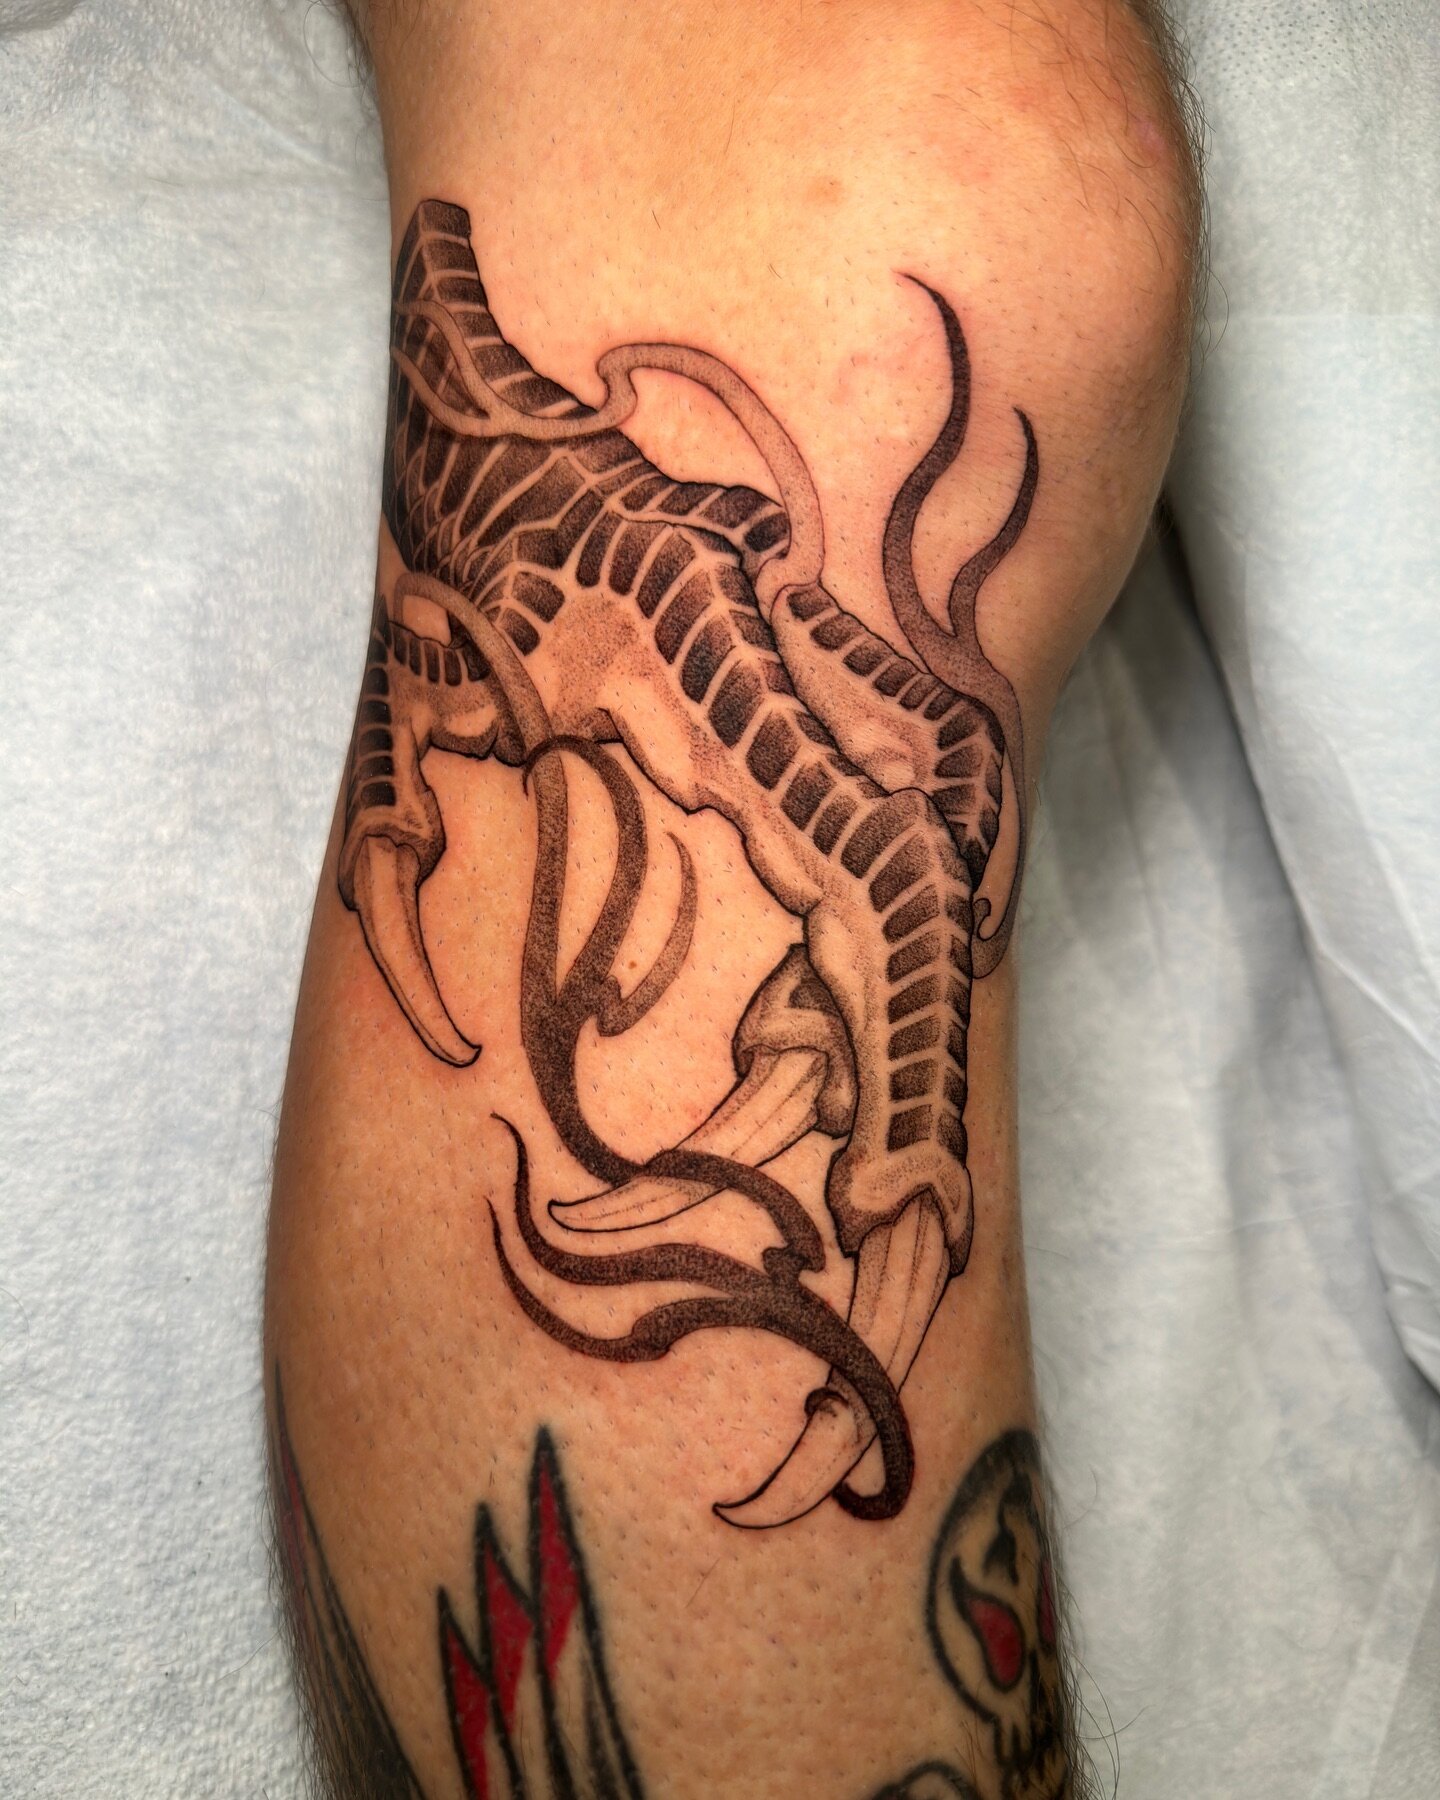 Check out this Dragon claw done by @tattoos.alexander ! 
He is wanting to build his portfolio in Japanese work, and is offering discounted rates for the months of December and January on Japanese style pieces! 
.
If you are interested in working with